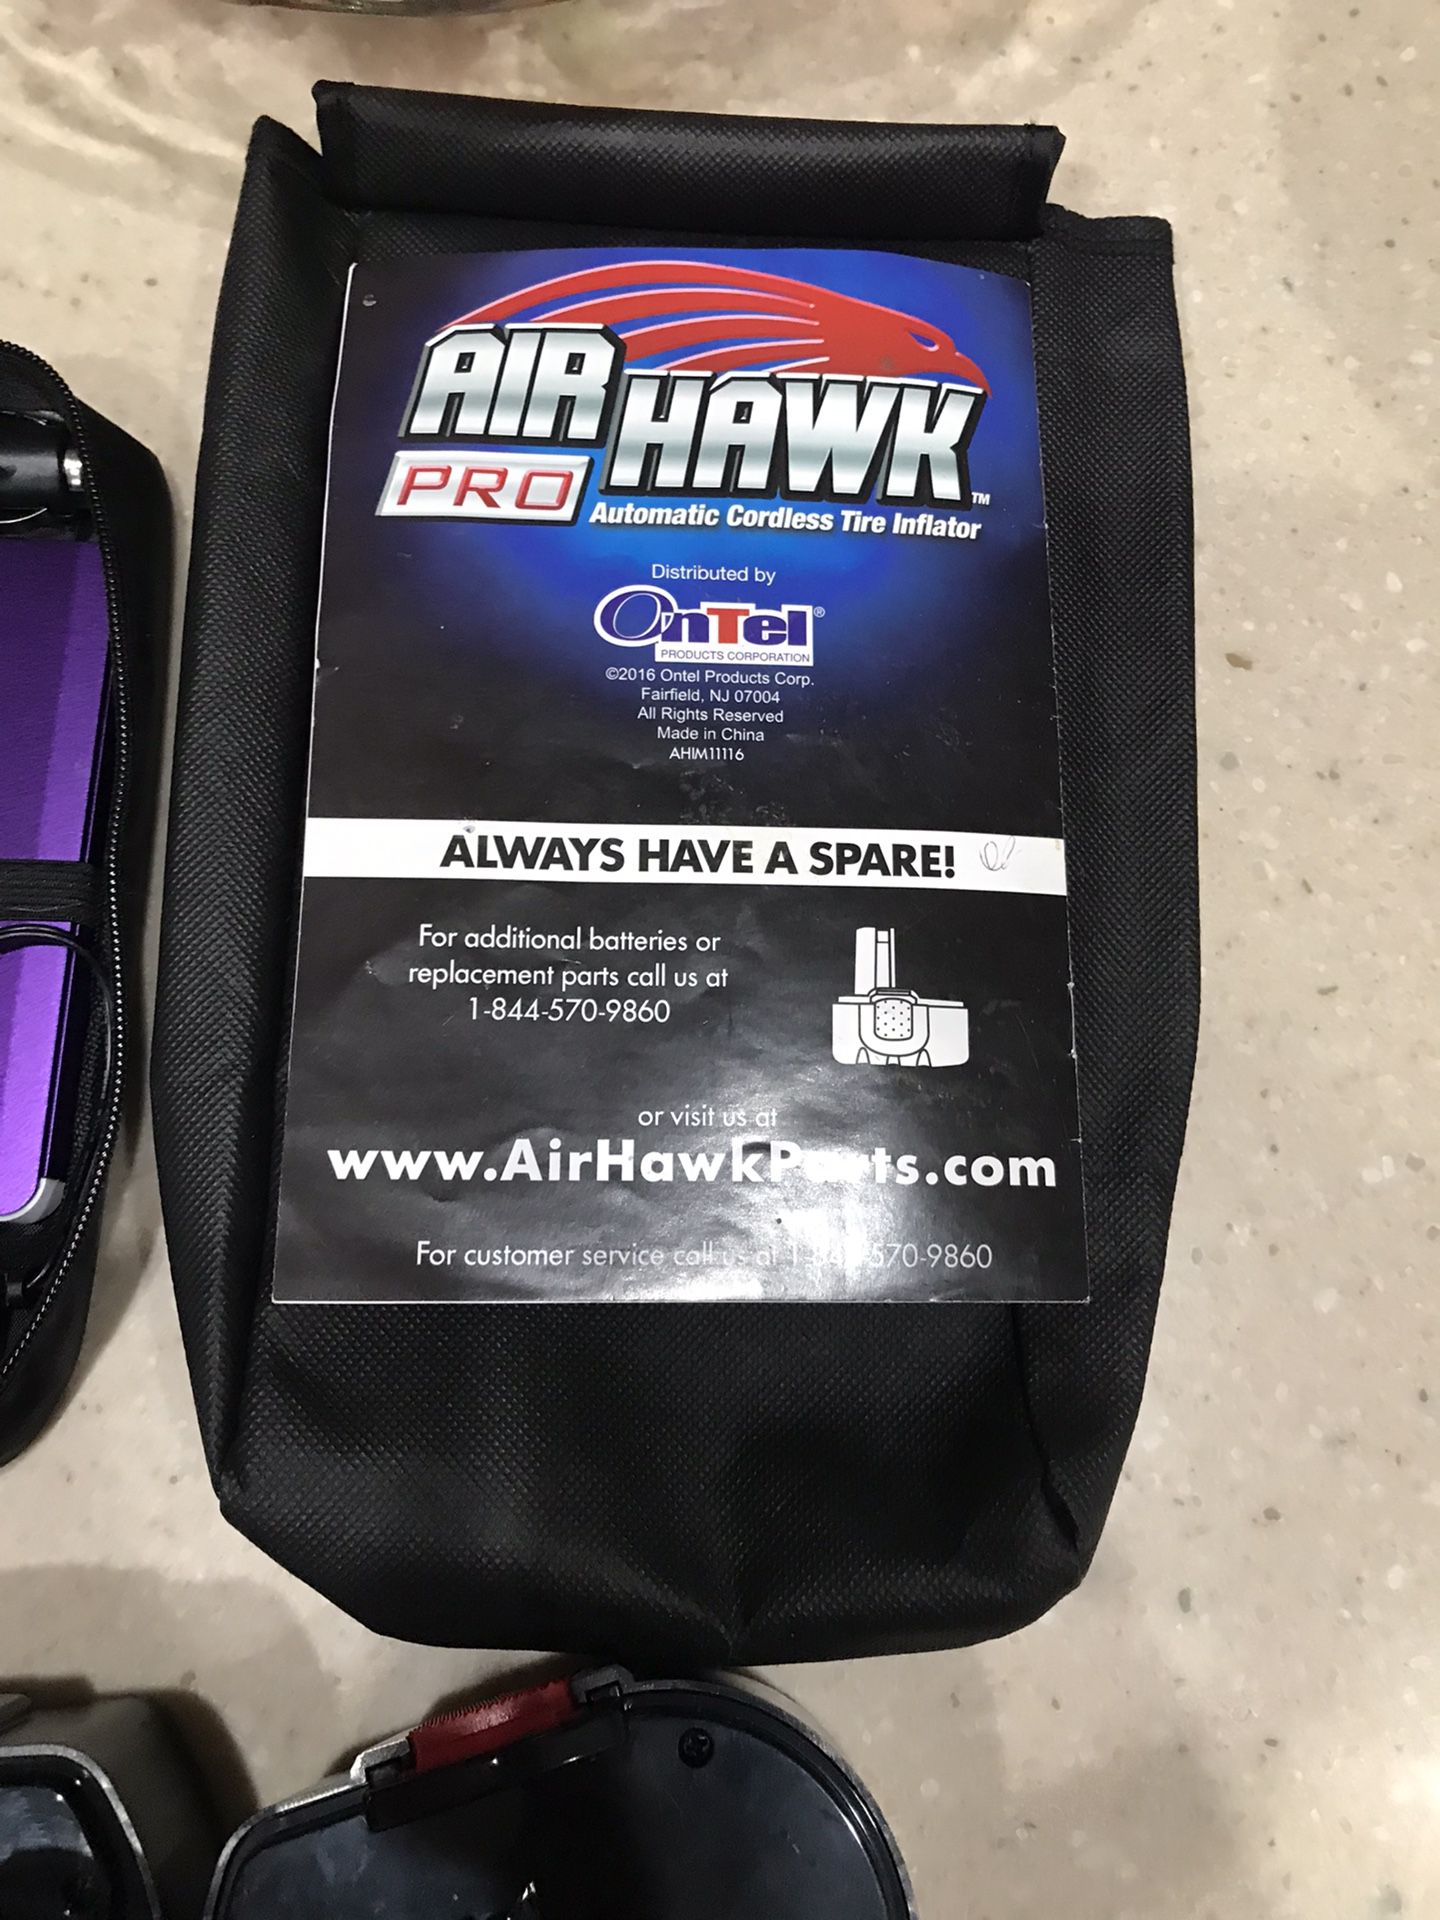 New Rechargable Airhawk Pro Automatic Tire Inflator